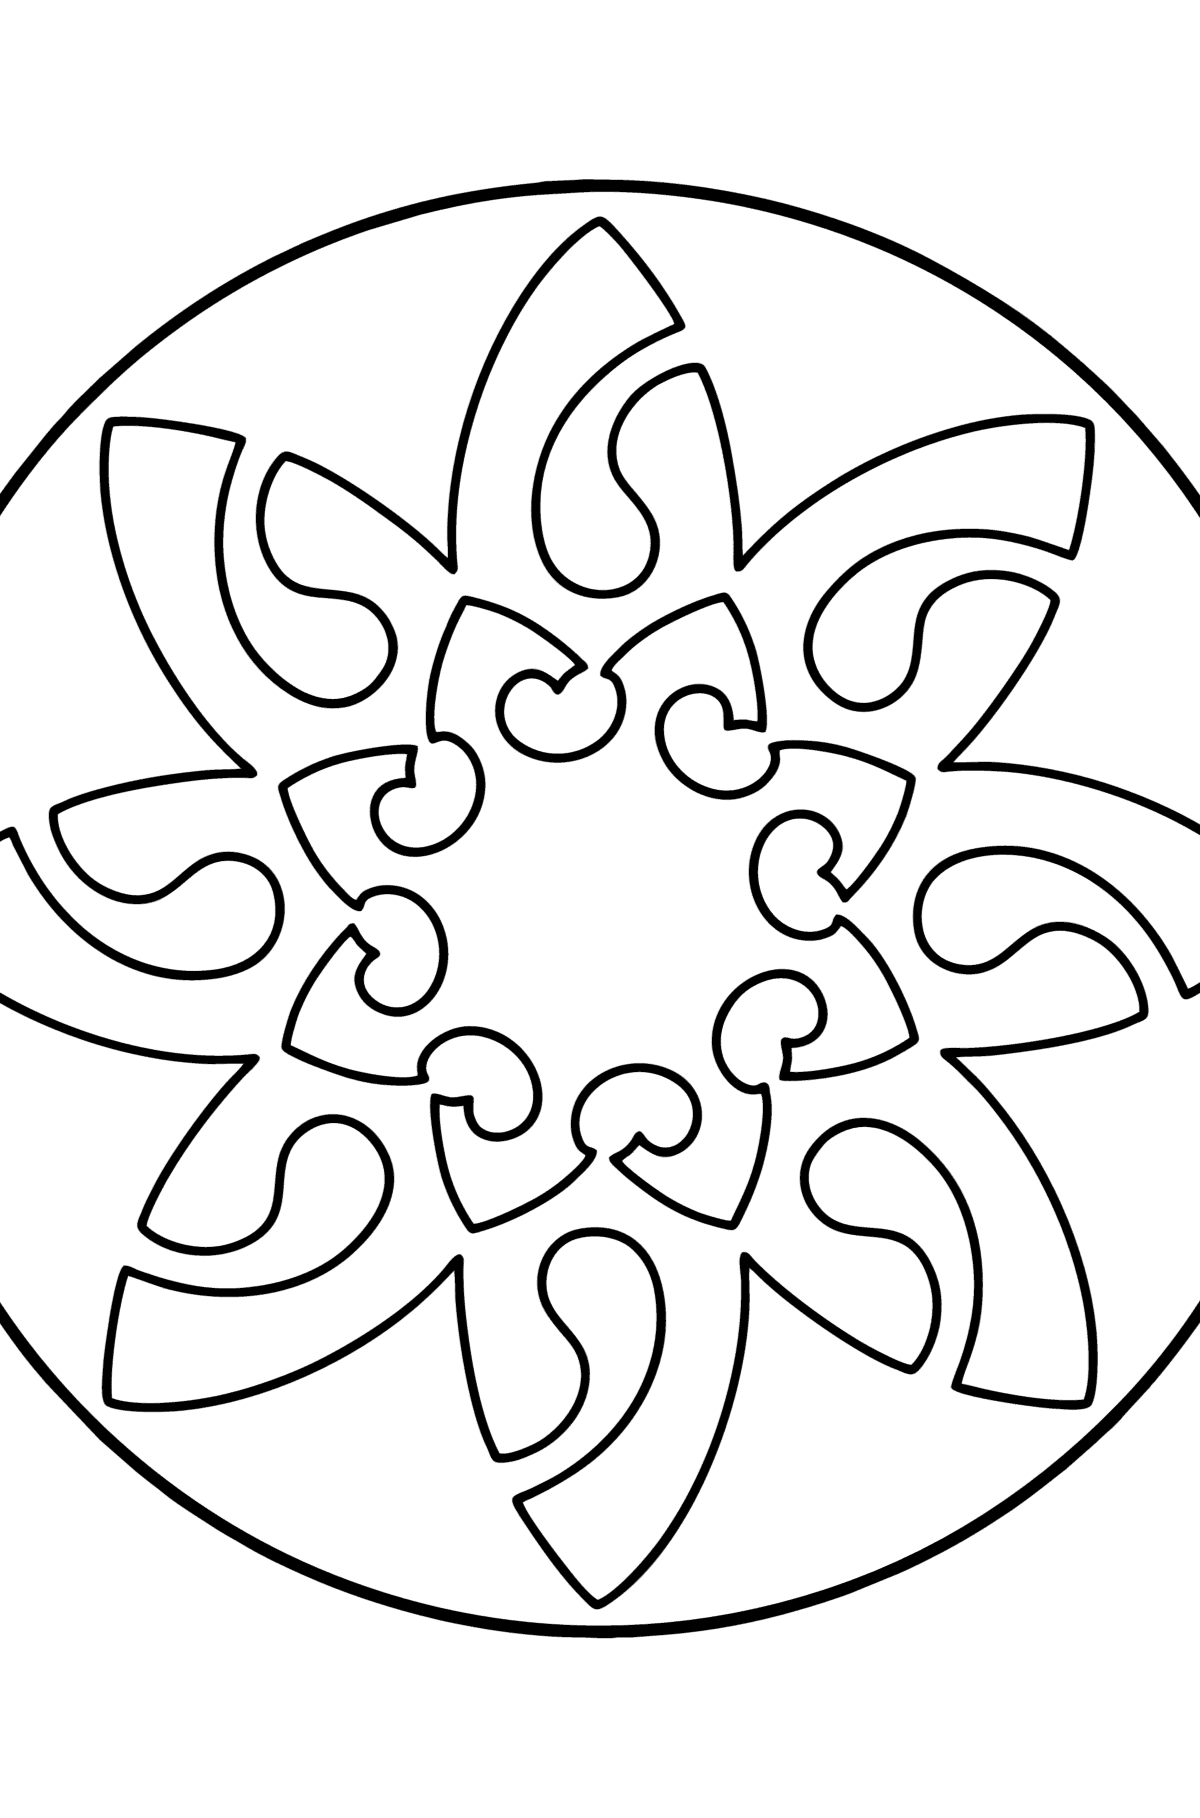 Mandala coloring page - 3 elements - Coloring Pages for Kids